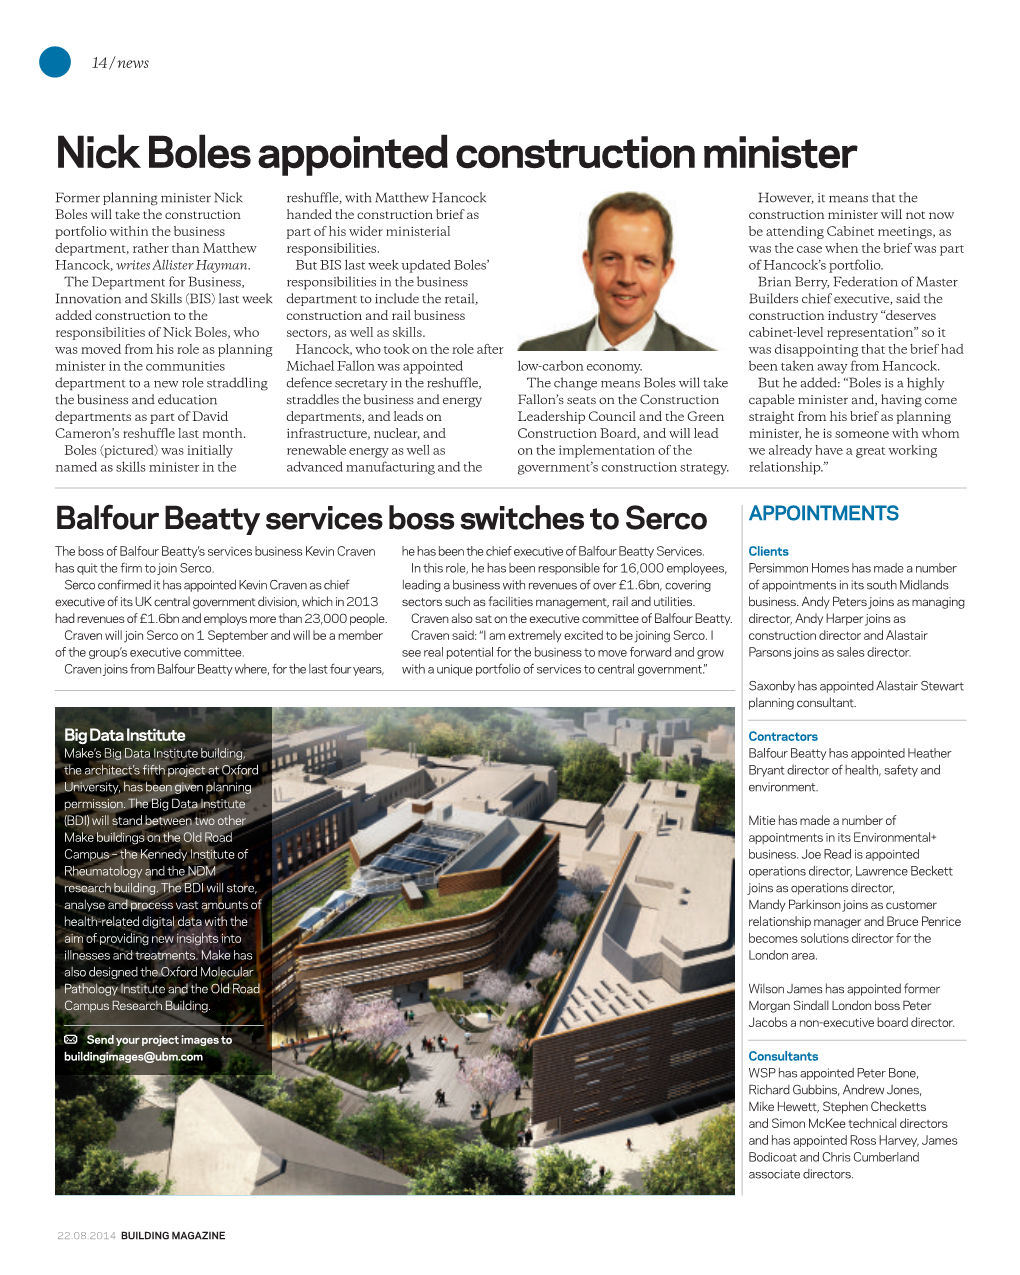 Nick Boles Appointed Construction Minister